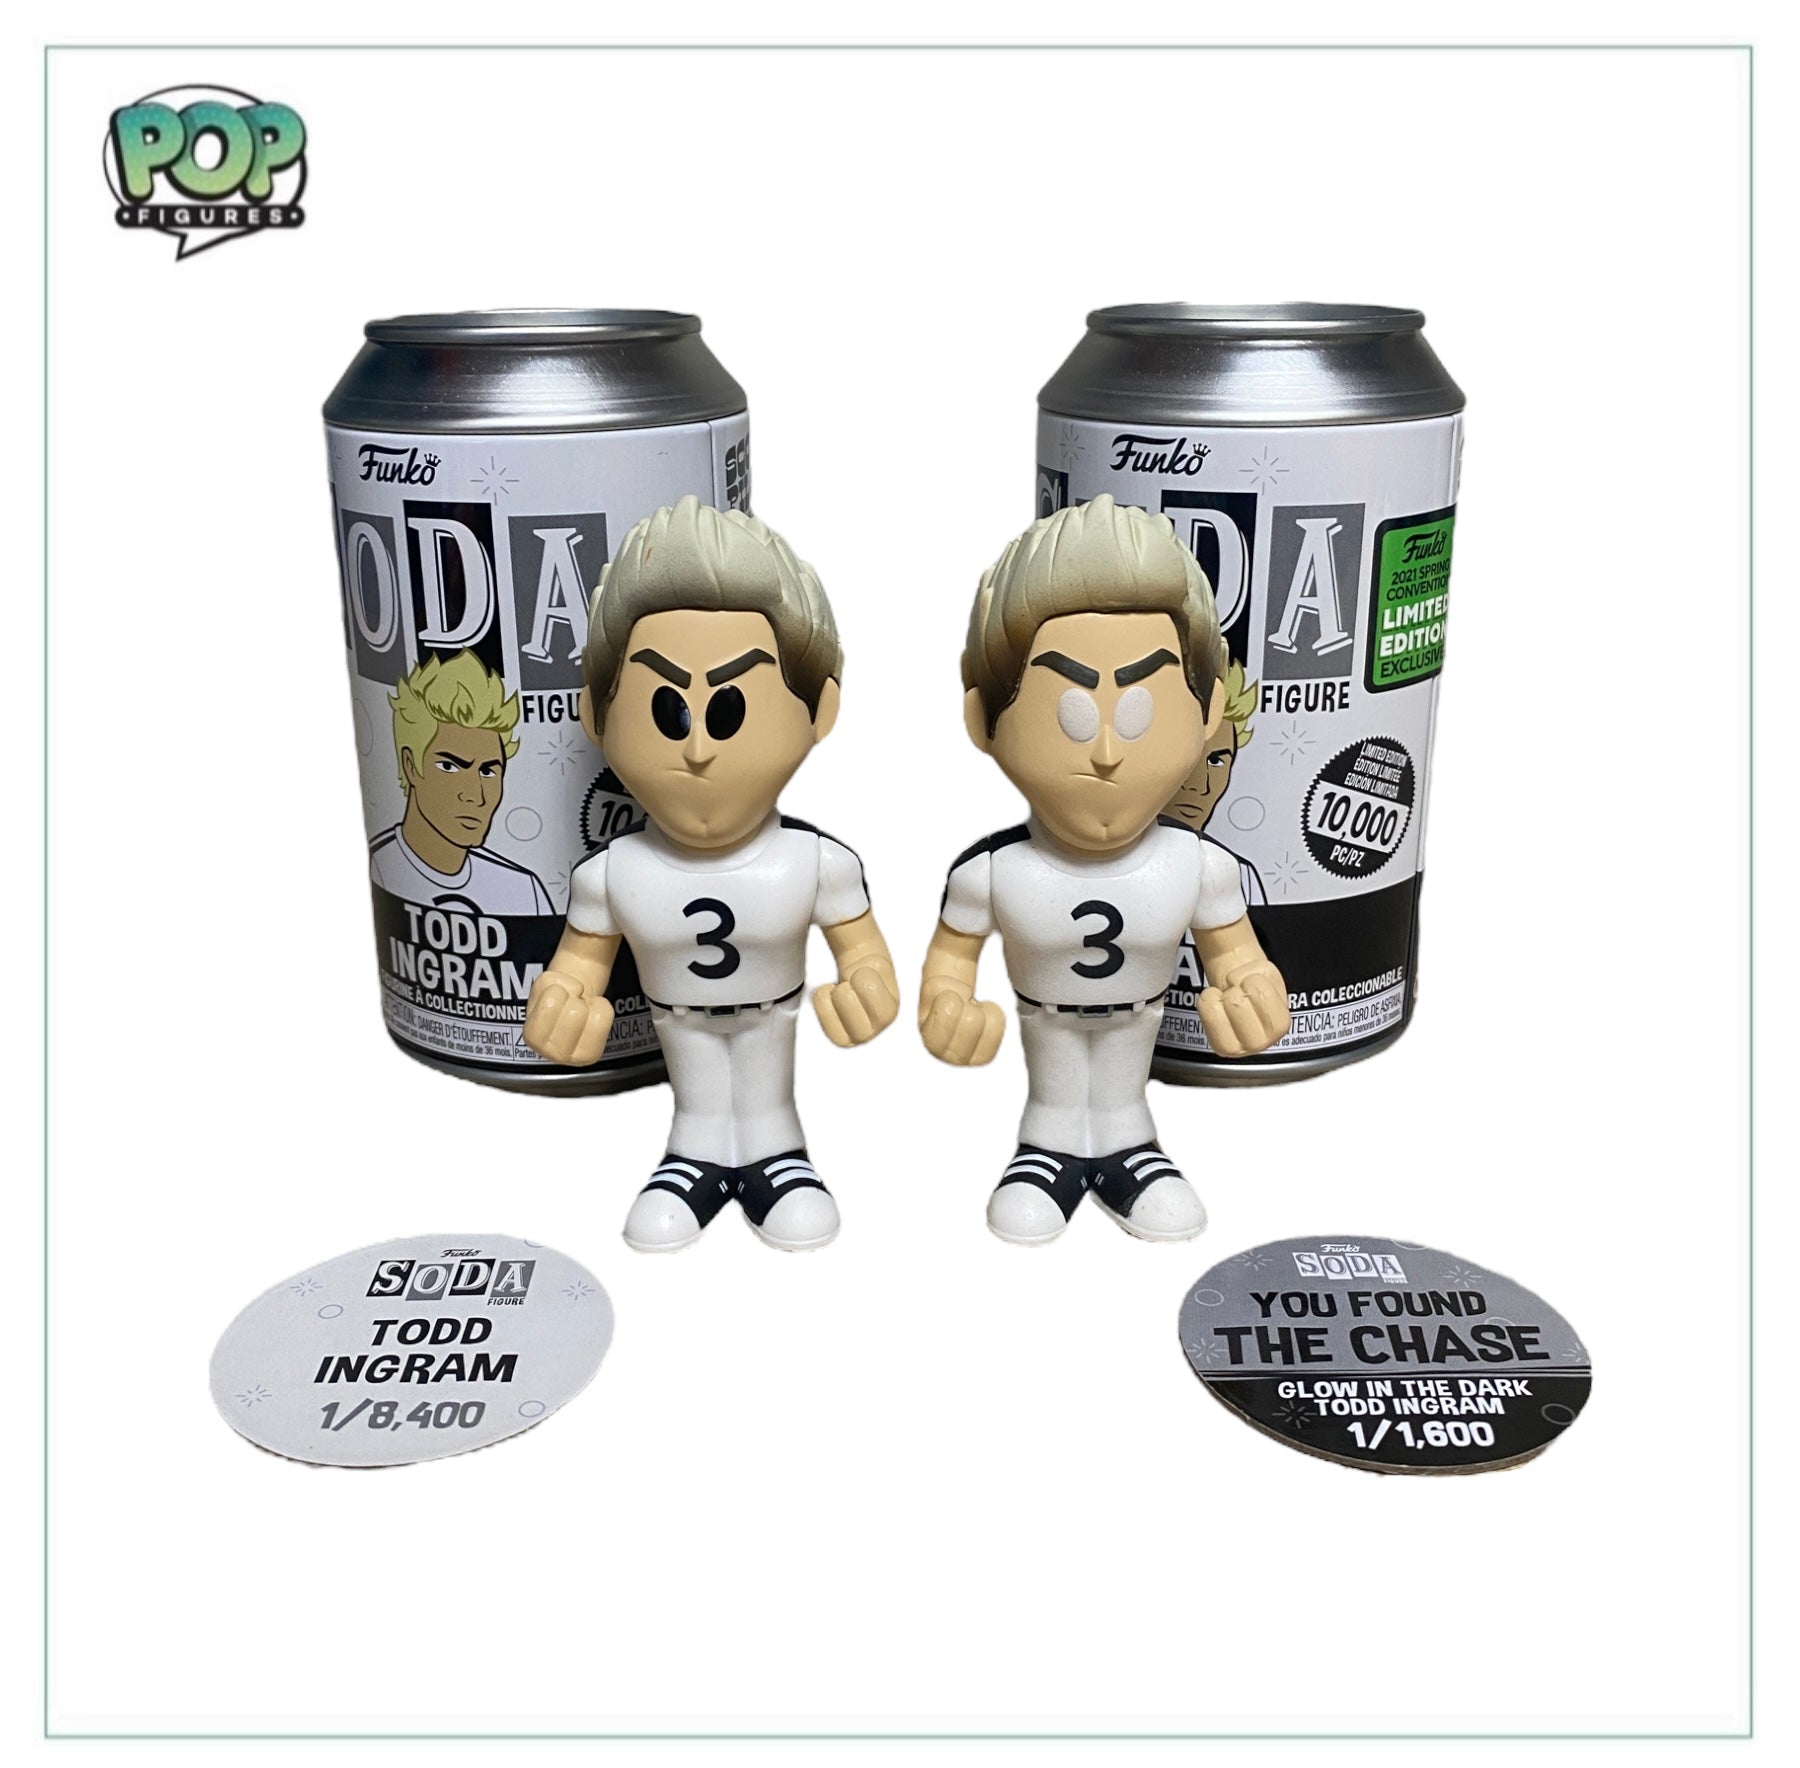 Todd Ingram Common & Glow In The Dark Chase Funko Soda Vinyl Figure Pair! - ECCC 2021 Shared Exclusive LE1/8400 & LE1/1600